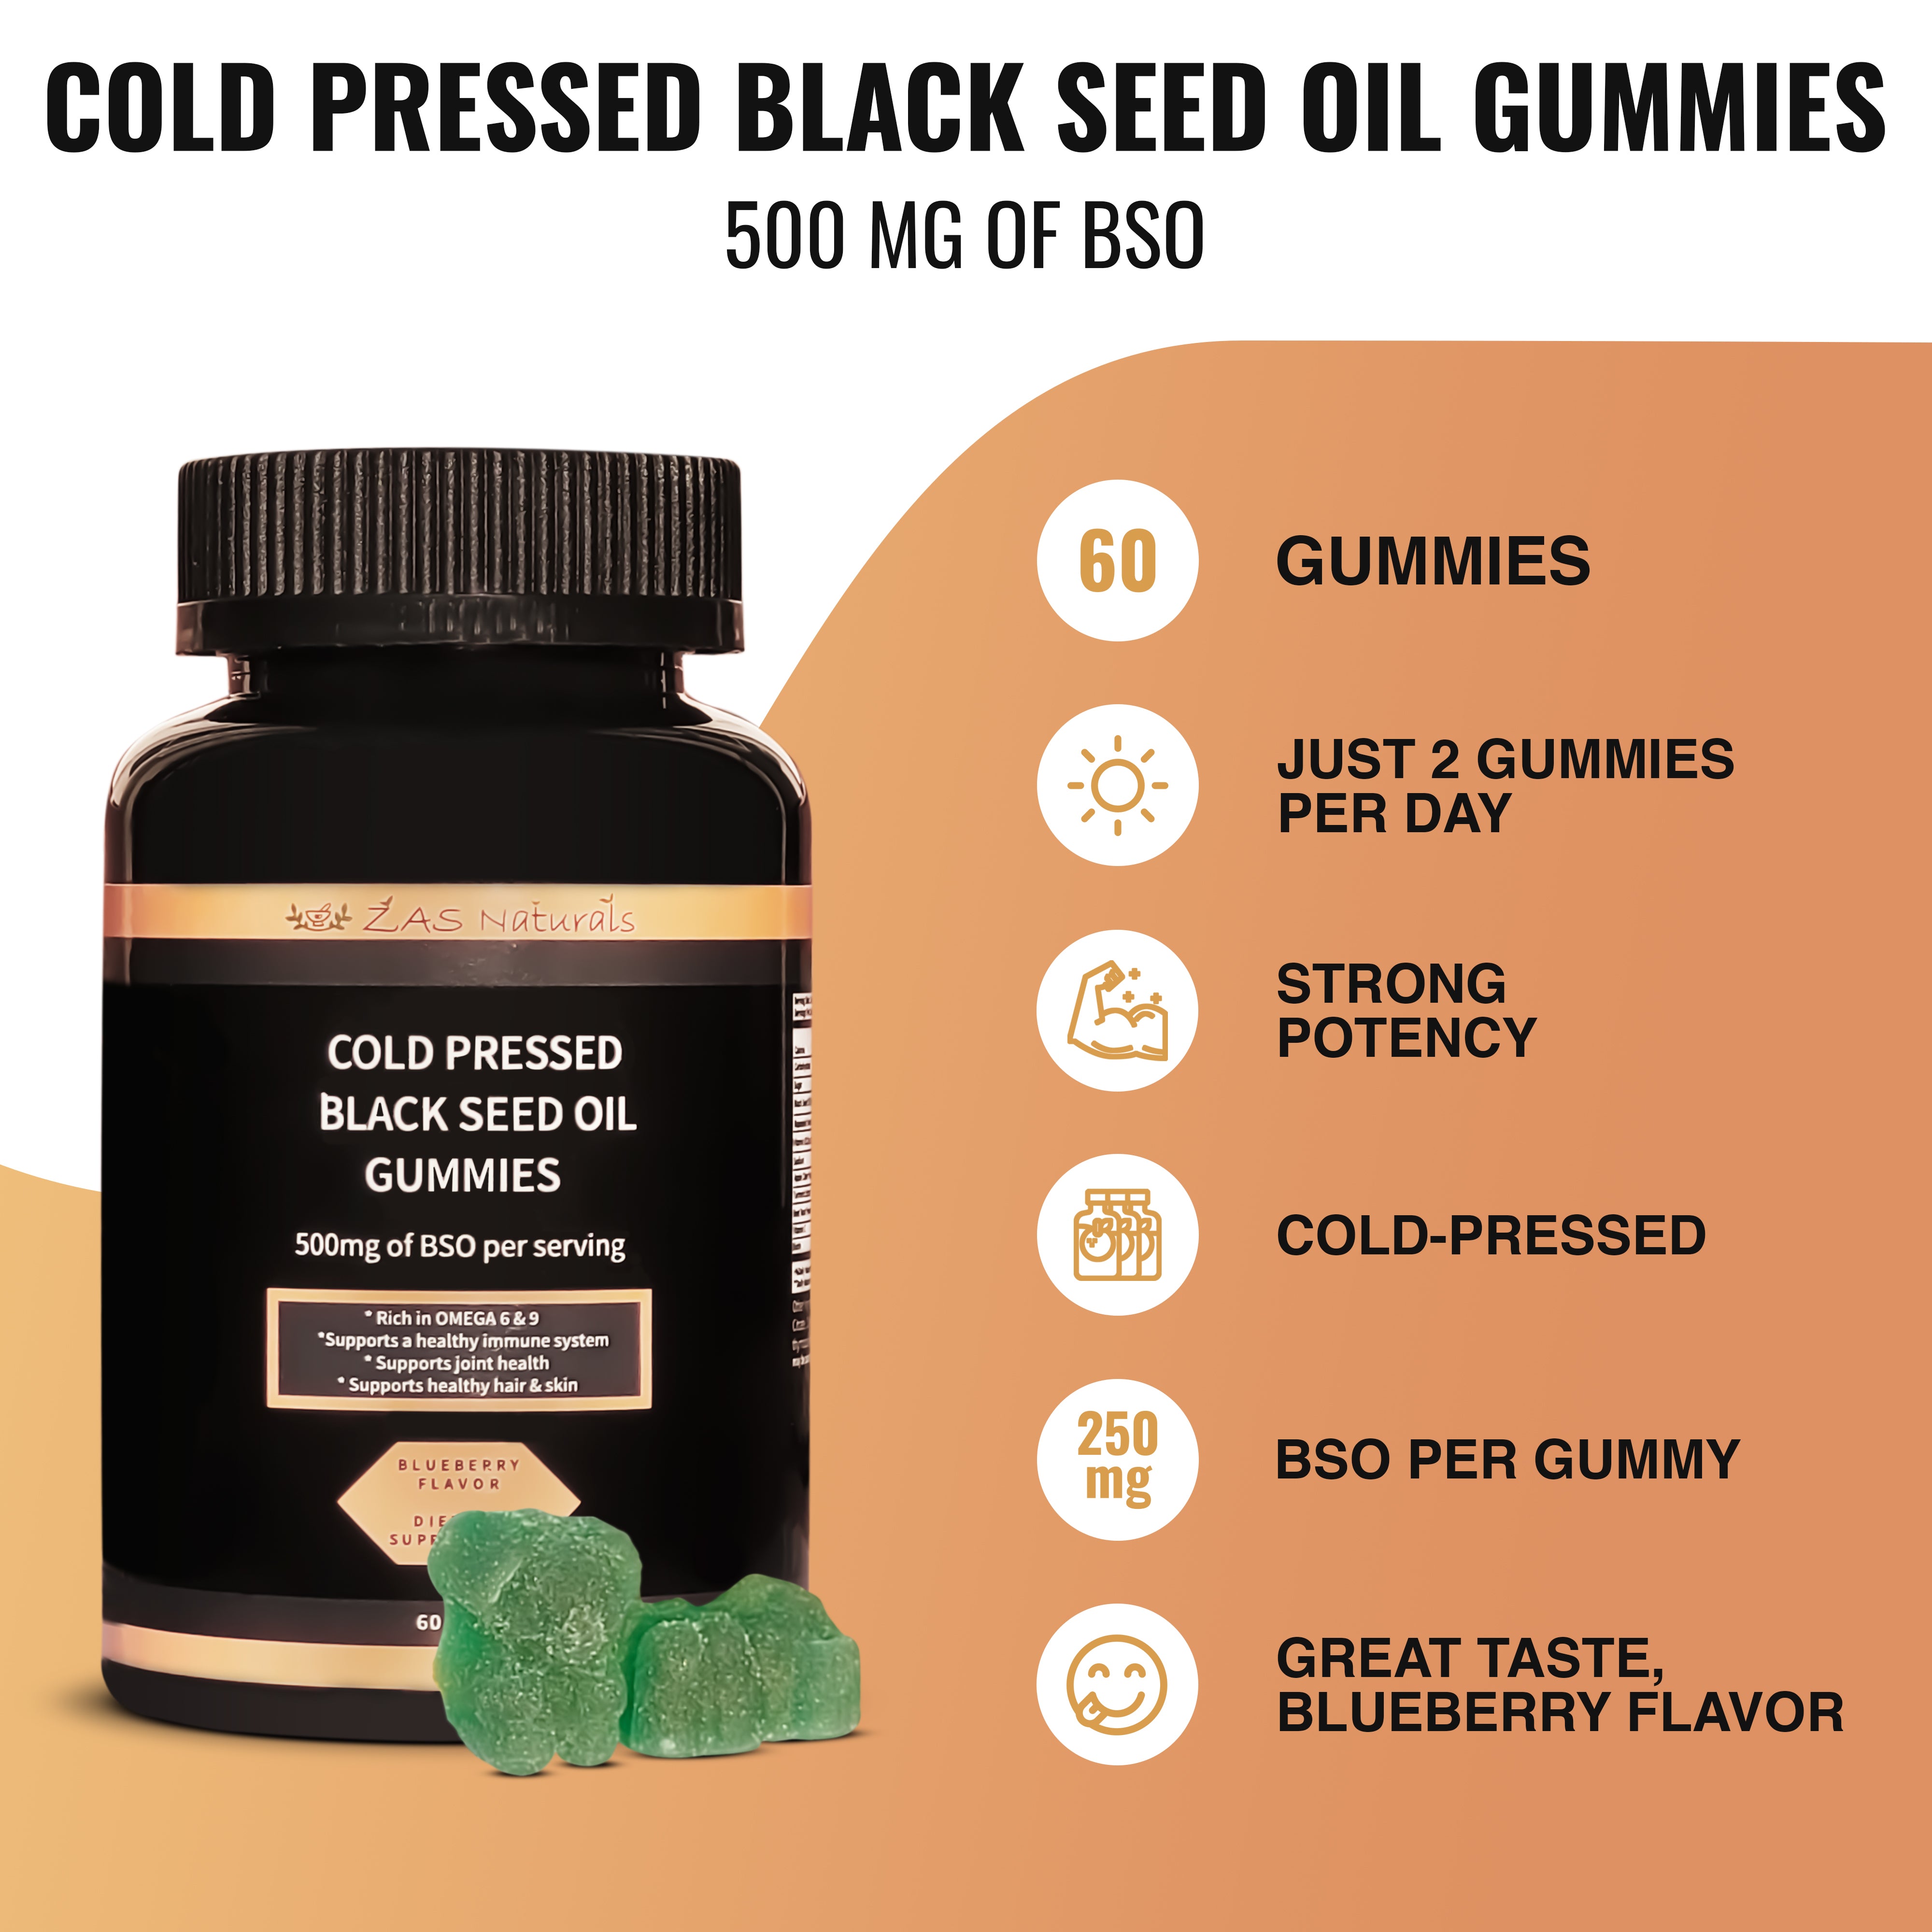 Cold Pressed Black Seed Oil Gummies for Adults and Children